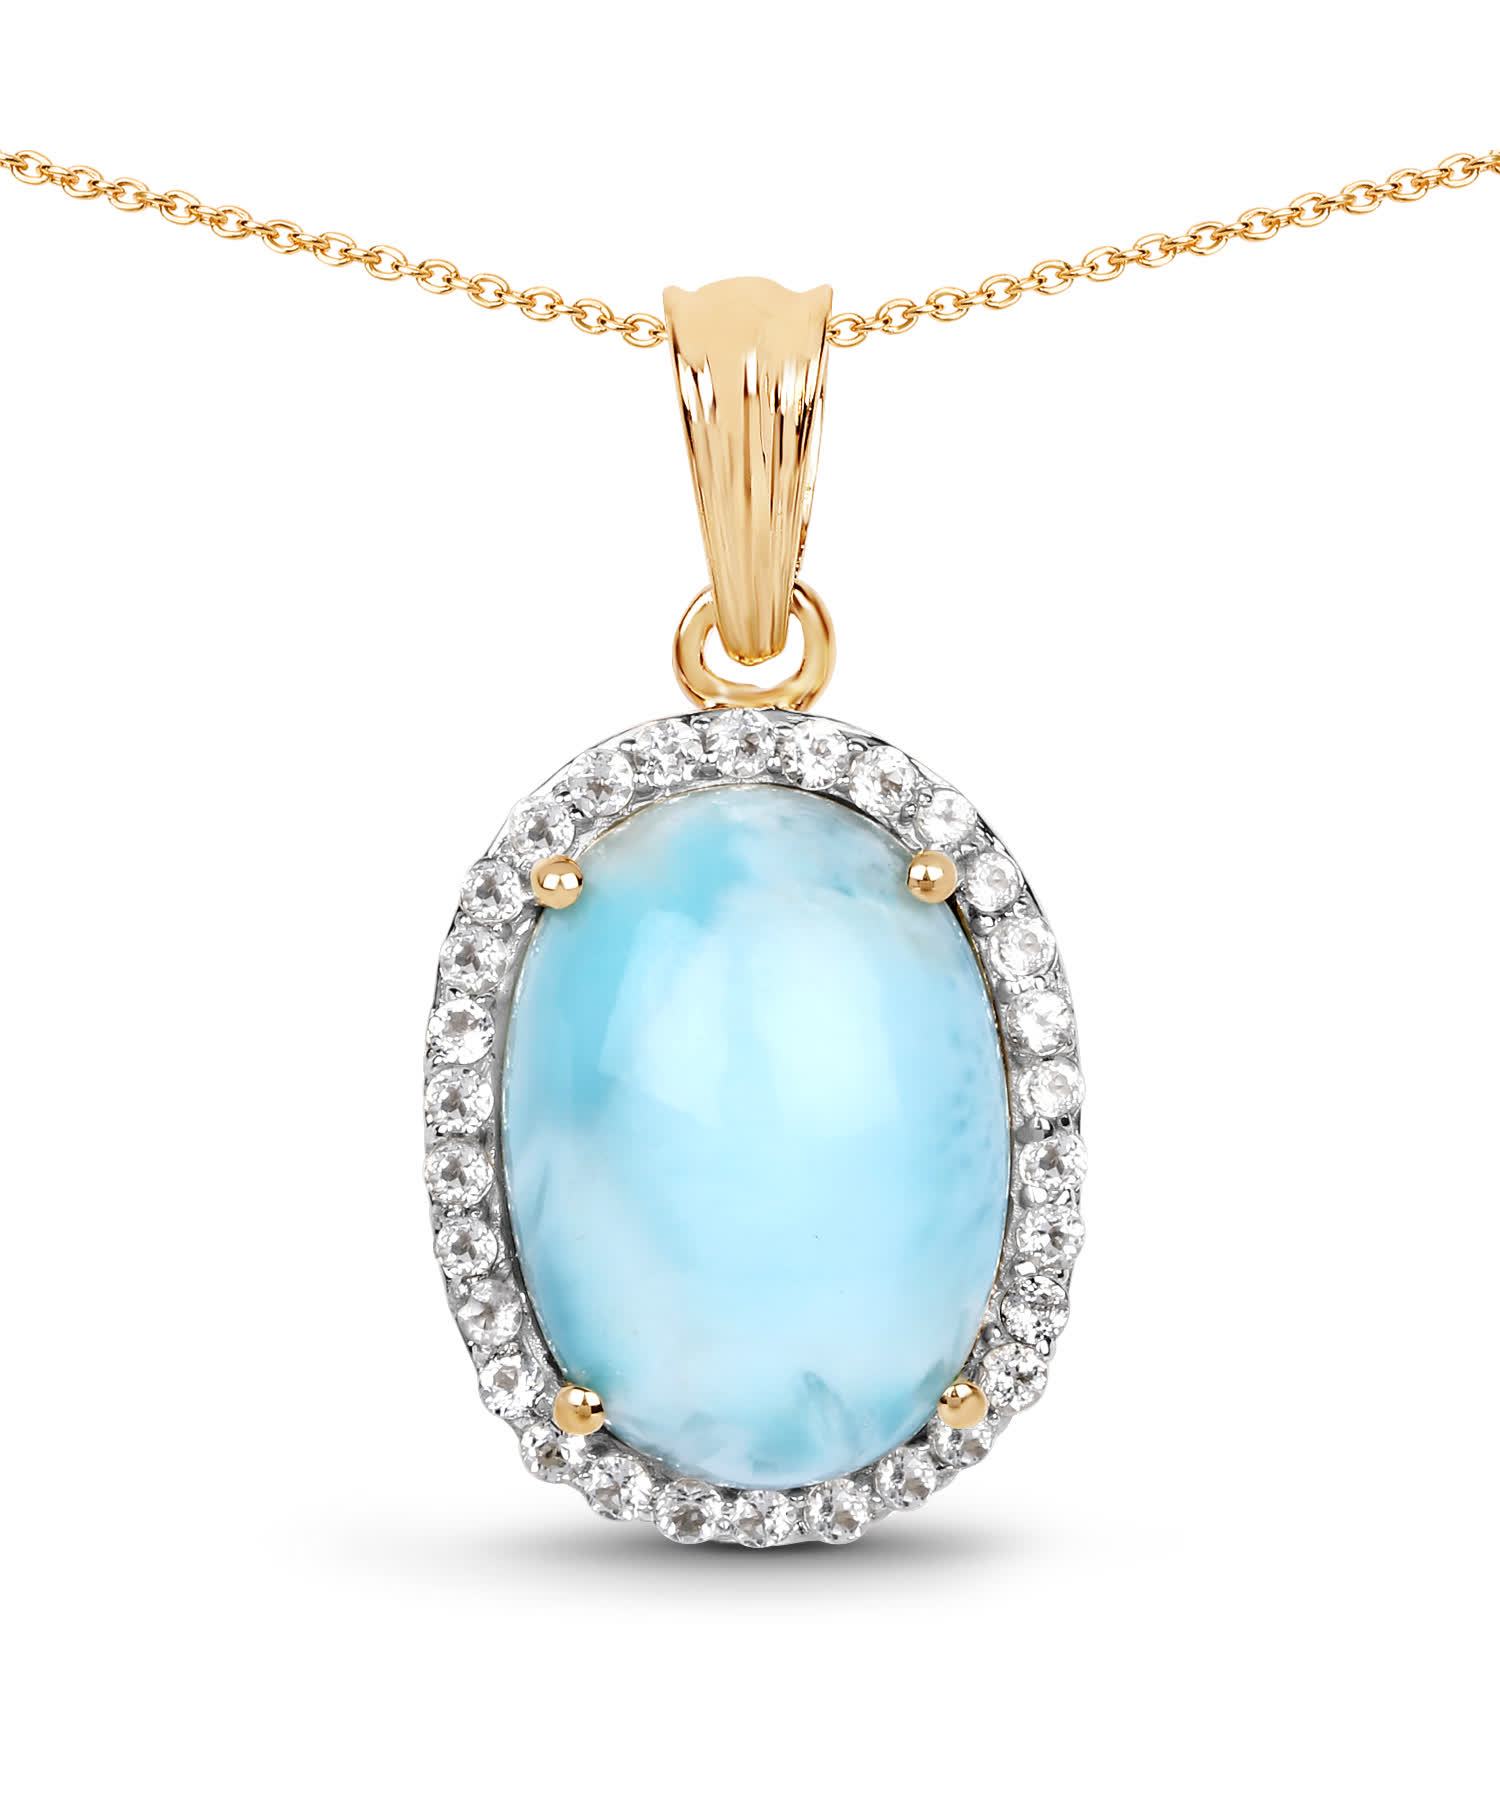 13.55ctw Natural Larimar and Topaz 14k Gold Plated 925 Sterling Silver Oval Pendant With Chain View 1